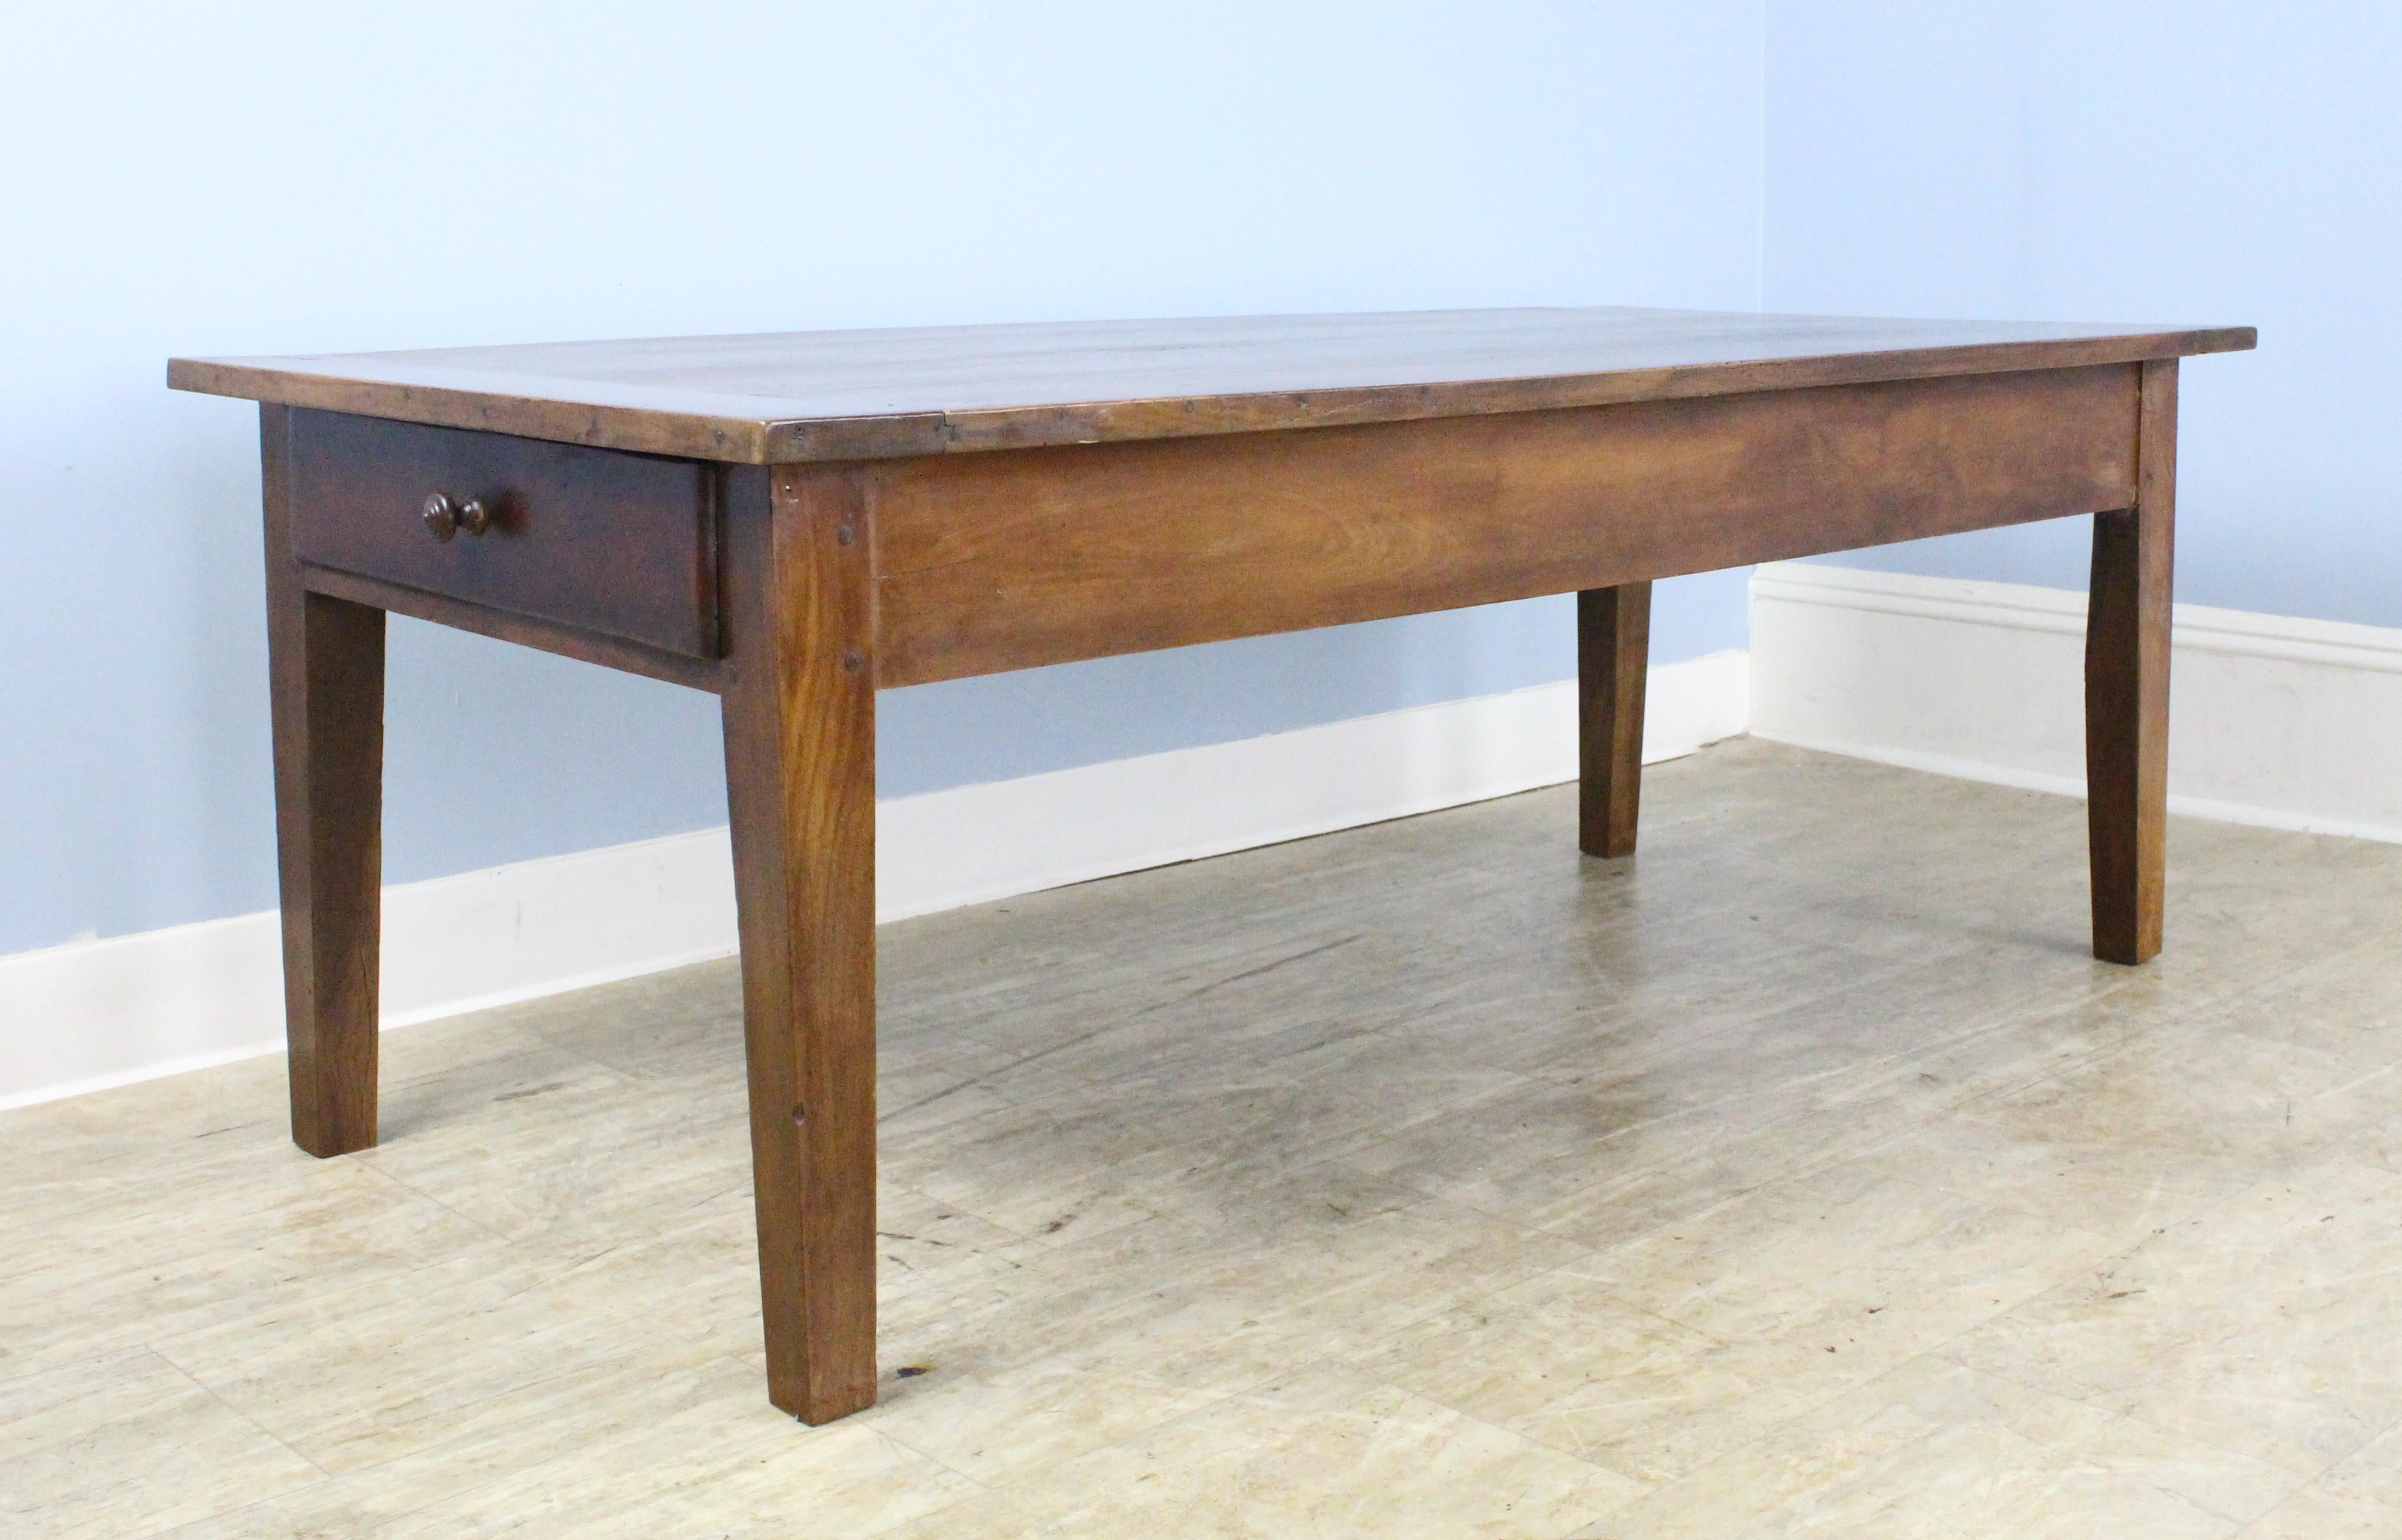 A simple, classic cherry farm table with a drawer at either end, in very good, clean condition. Beautiful cherry grain and color, with lovely glossy patina.  Top has been shimmed, shown in thumbnails.